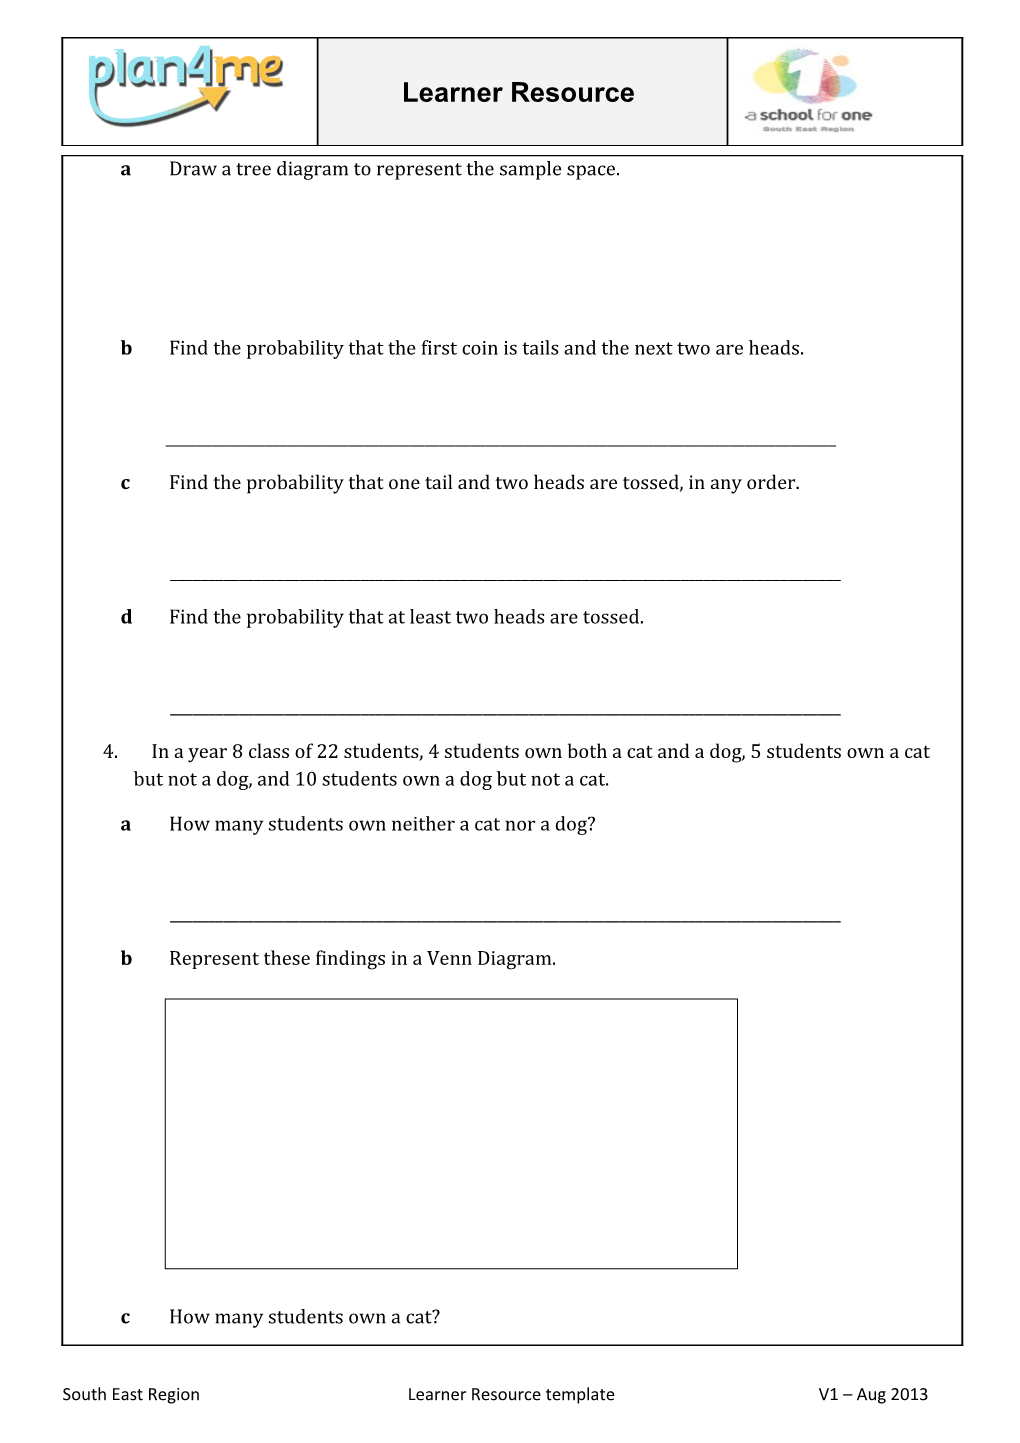 South East Region Learner Resource Template V1 Aug 2013 s2